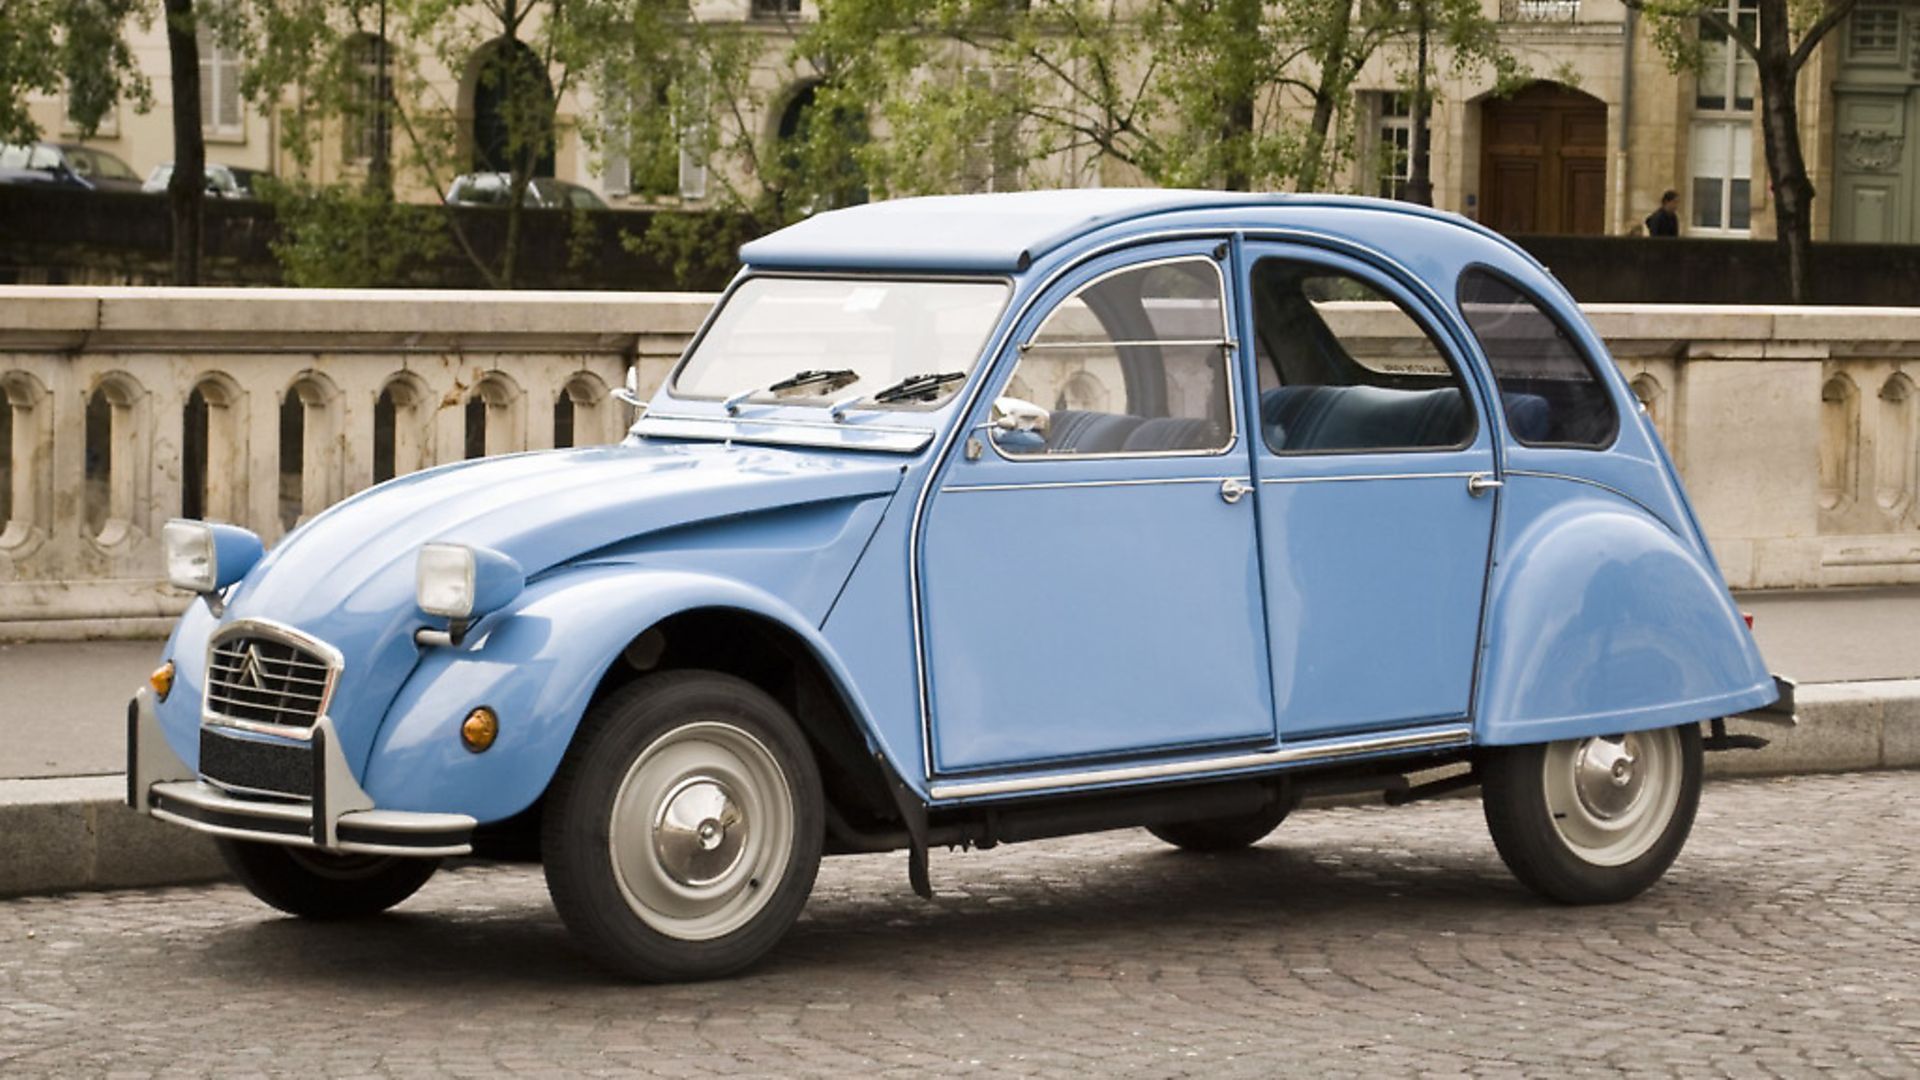 A French icon: the Citroën 2CV - Complete France